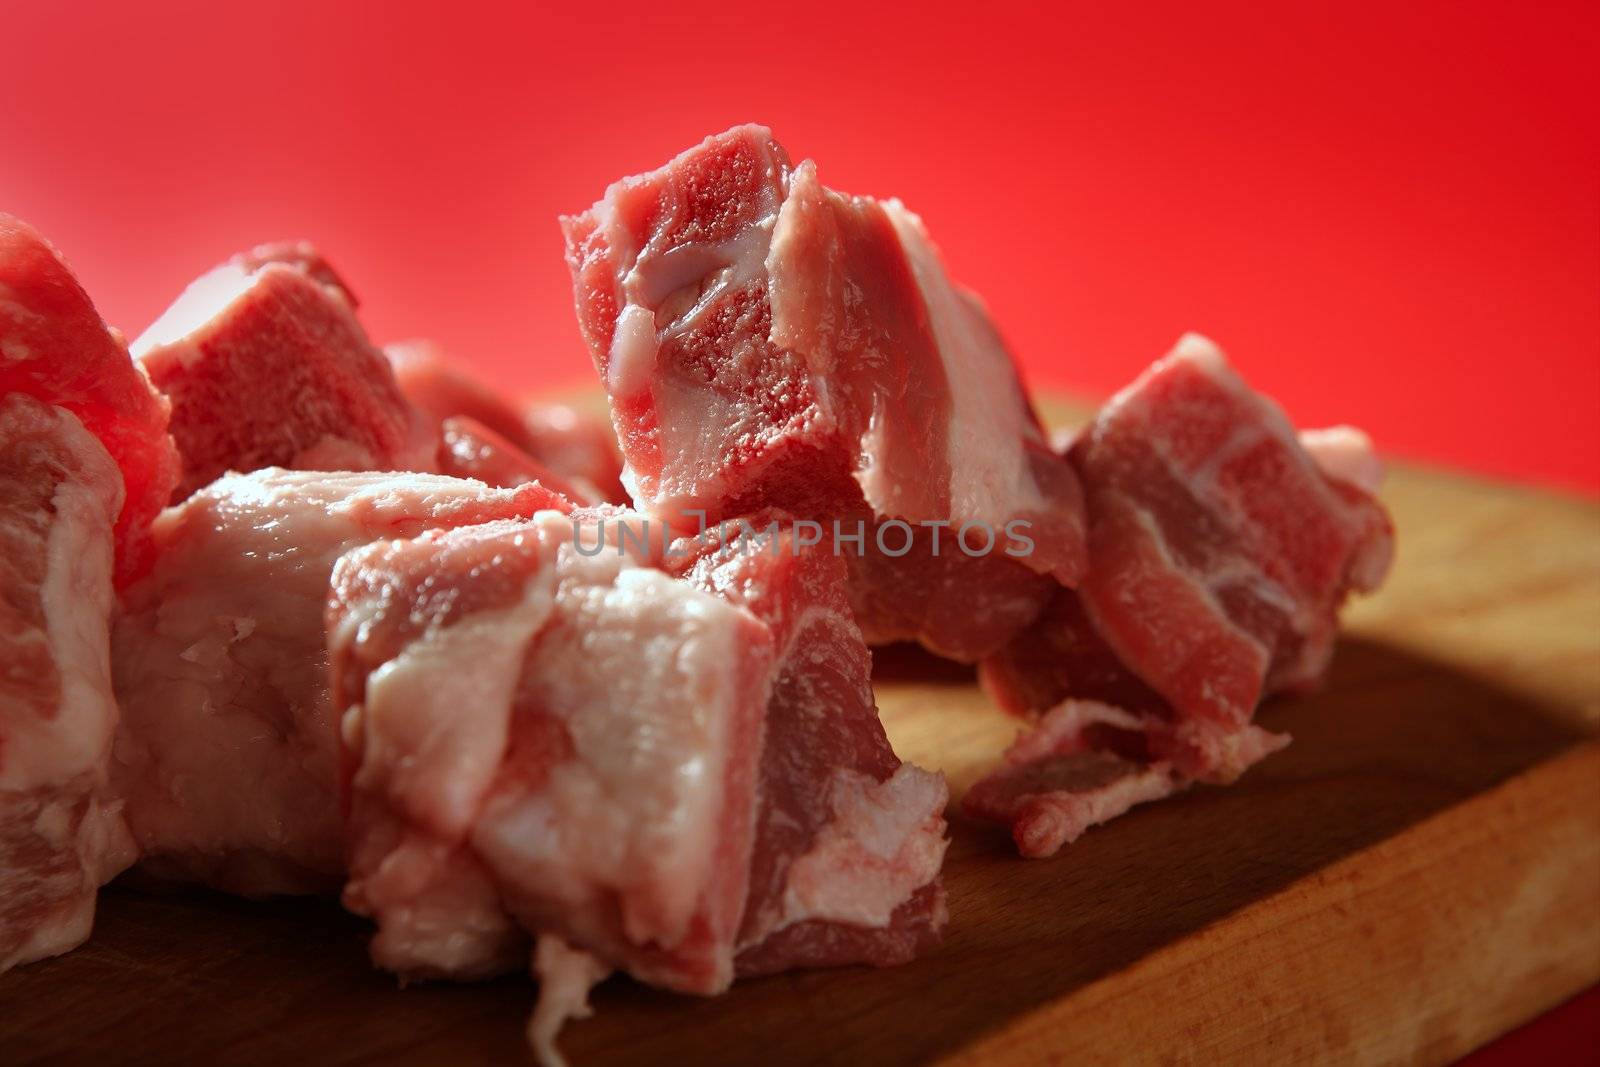 Pig, pork raw meat pieces over red background